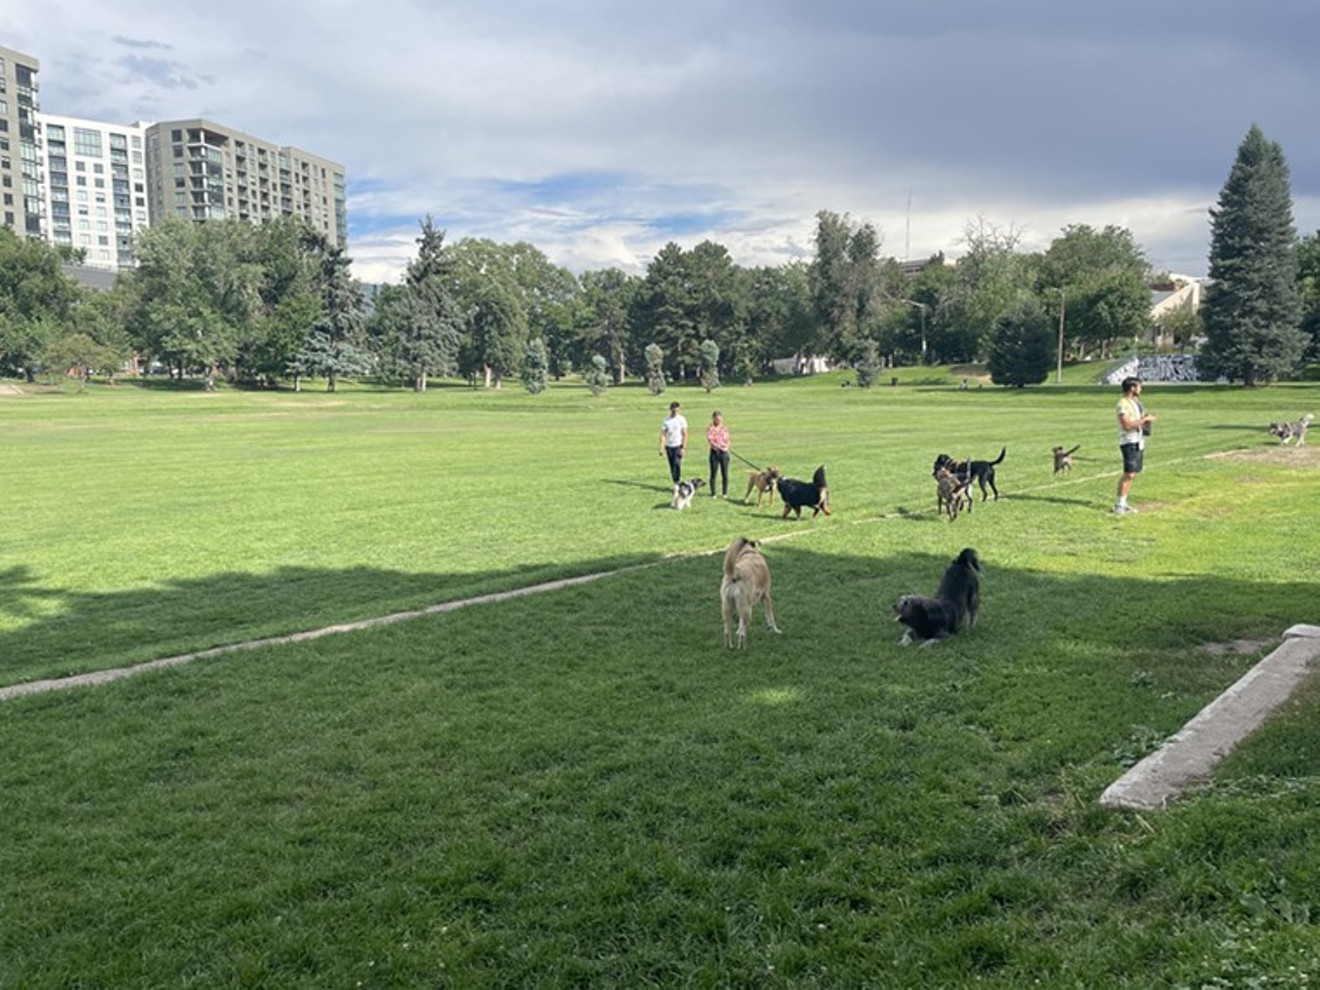 Illegal "dog parties" like this one in Sunken Gardens Park are one area where the parks department has conflicted with residents.